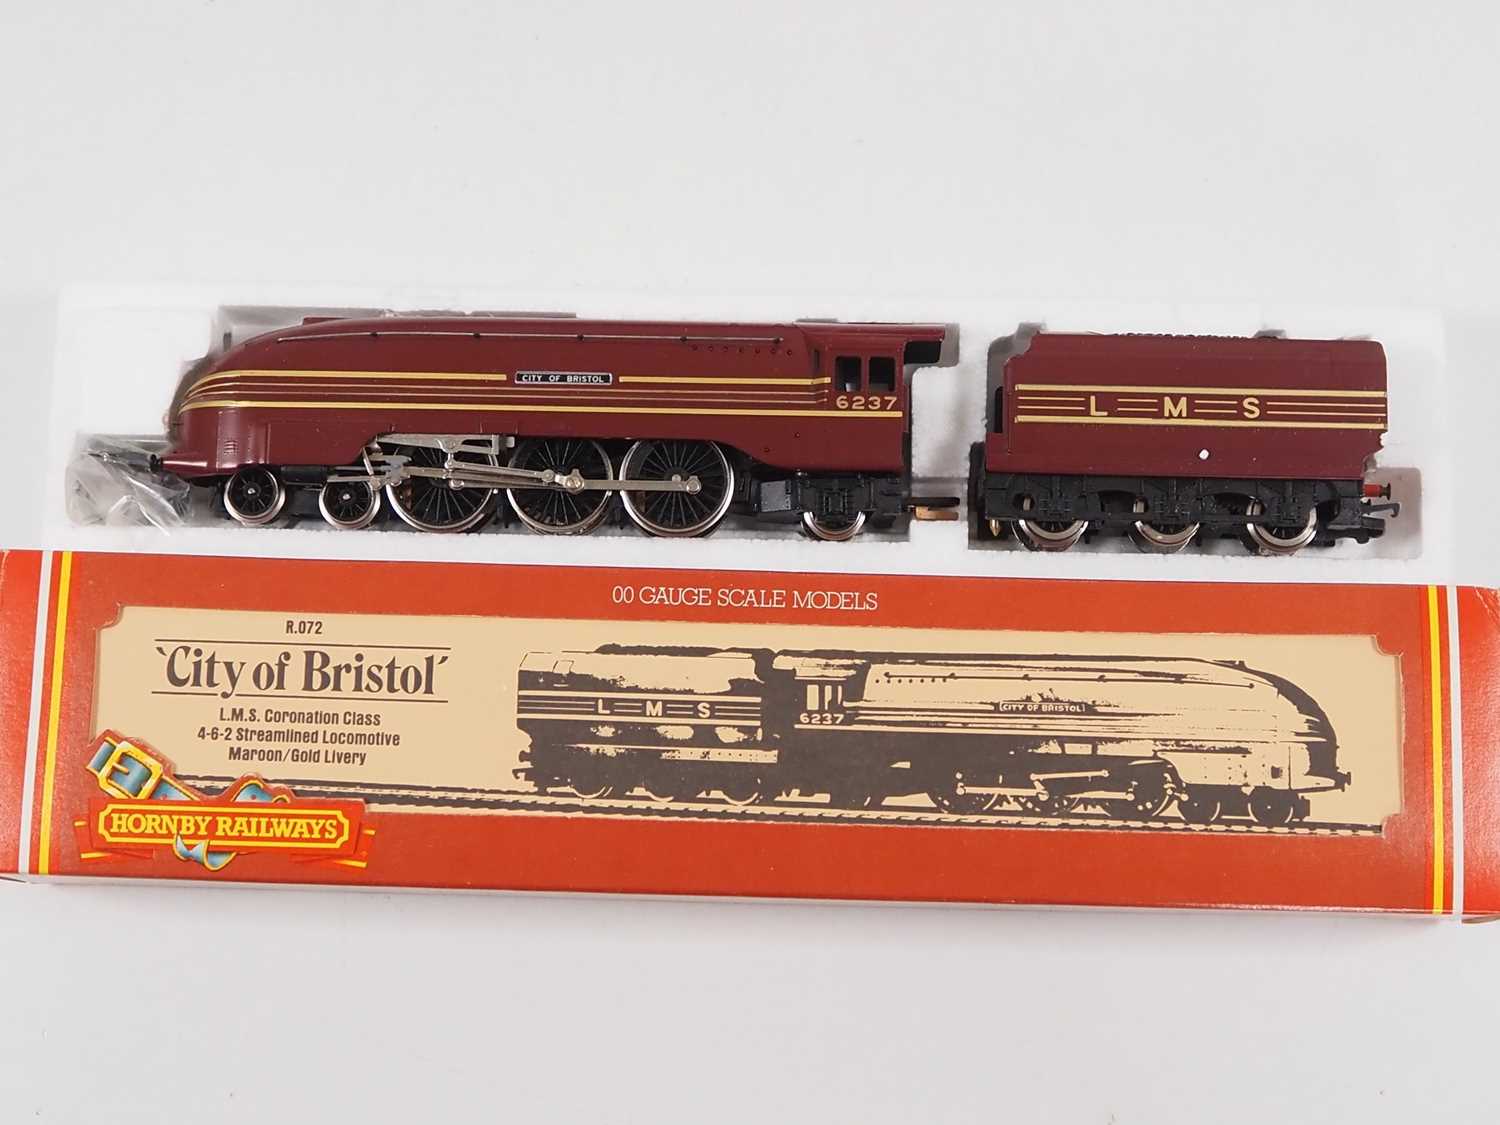 A group of OO gauge steam locomotives by HORNBY all in LMS maroon livery, Duchess of Sutherland - Image 2 of 5